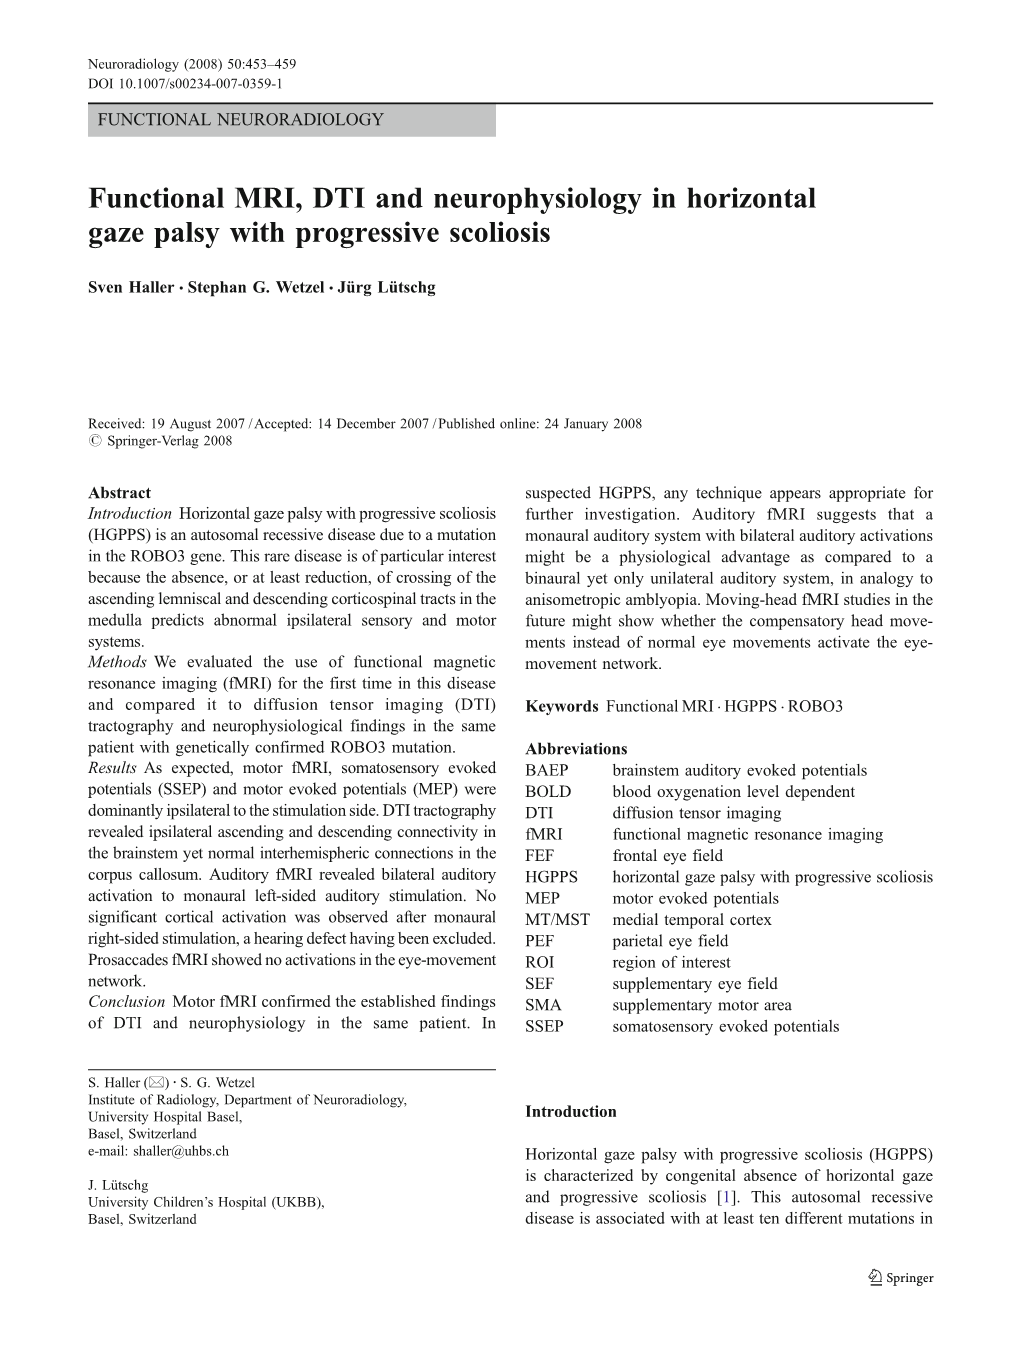 Functional MRI, DTI and Neurophysiology in Horizontal Gaze Palsy with Progressive Scoliosis